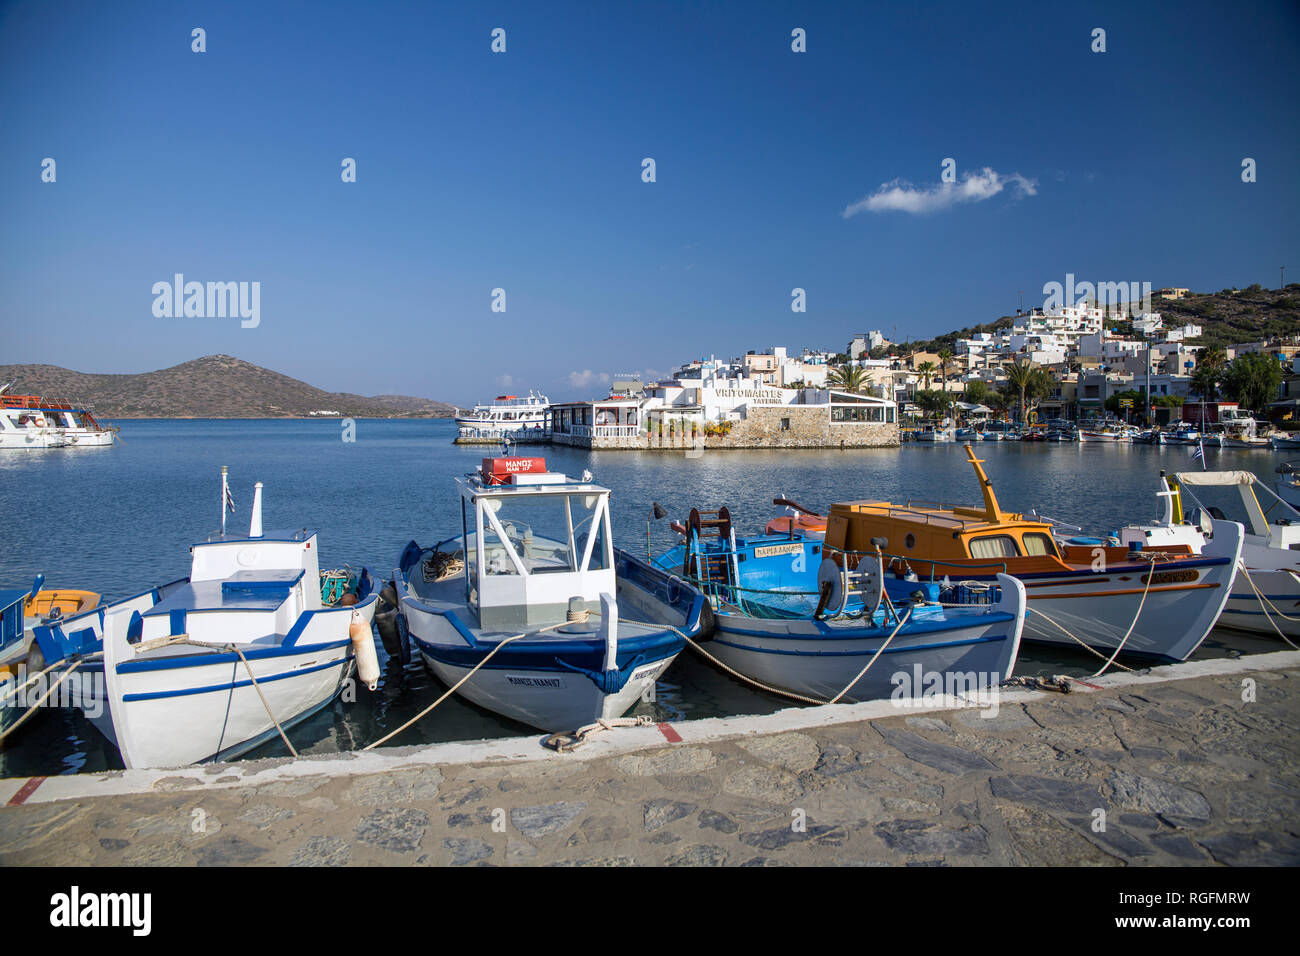 Small colorful fishing boats in the port. The harbor of Elunda in Crete, Greece. Stock Photo